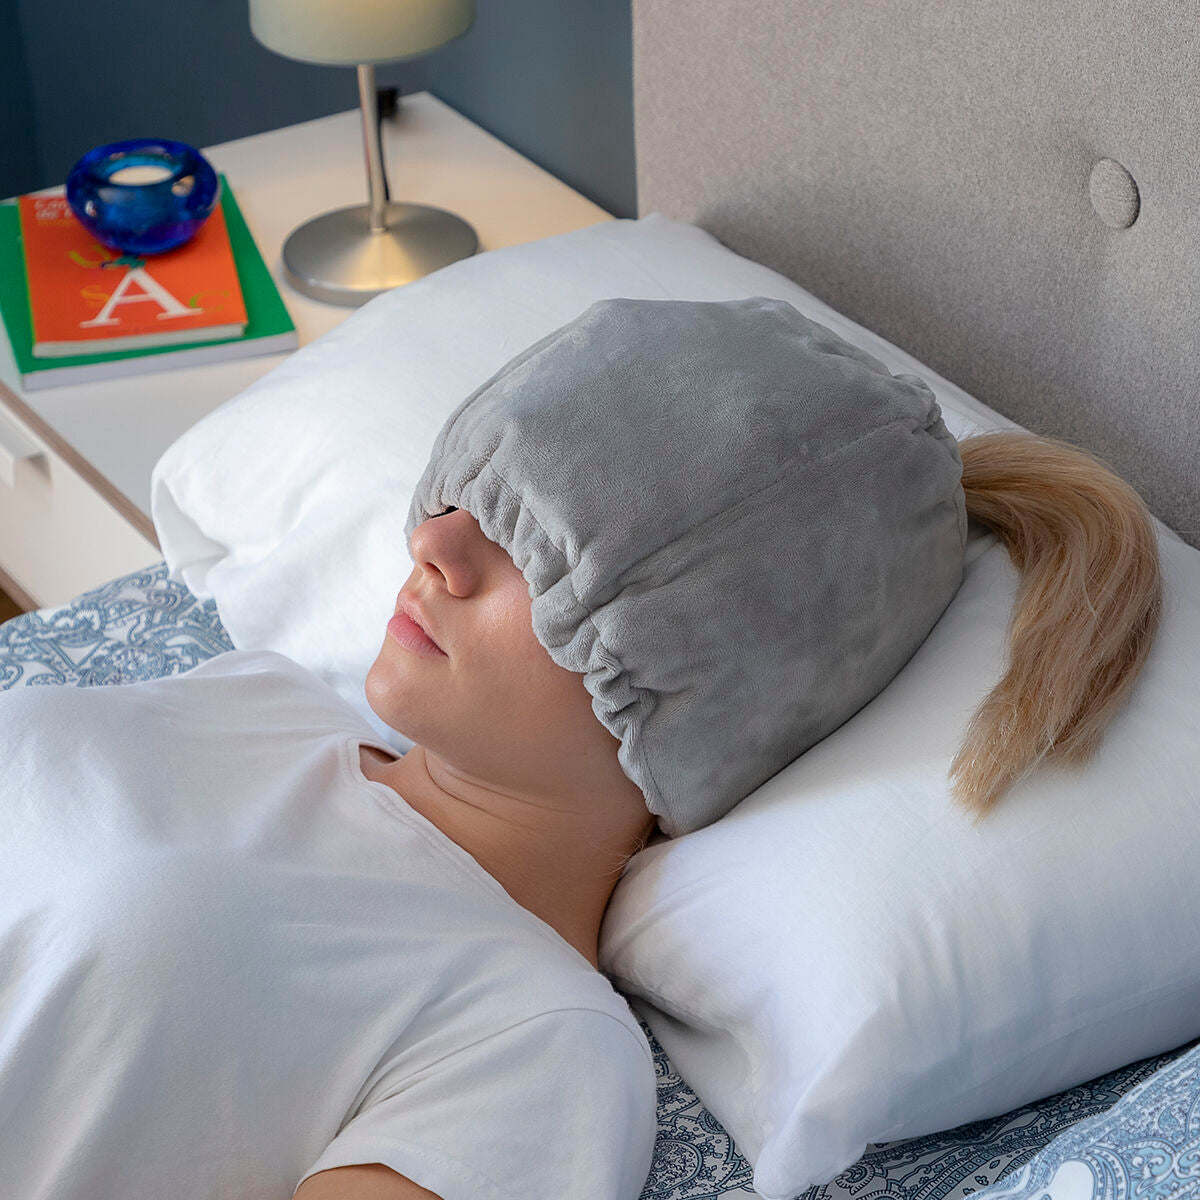 Gel Cap for Migraines and Relaxation Hawfron InnovaGoods - Calm Beauty IE